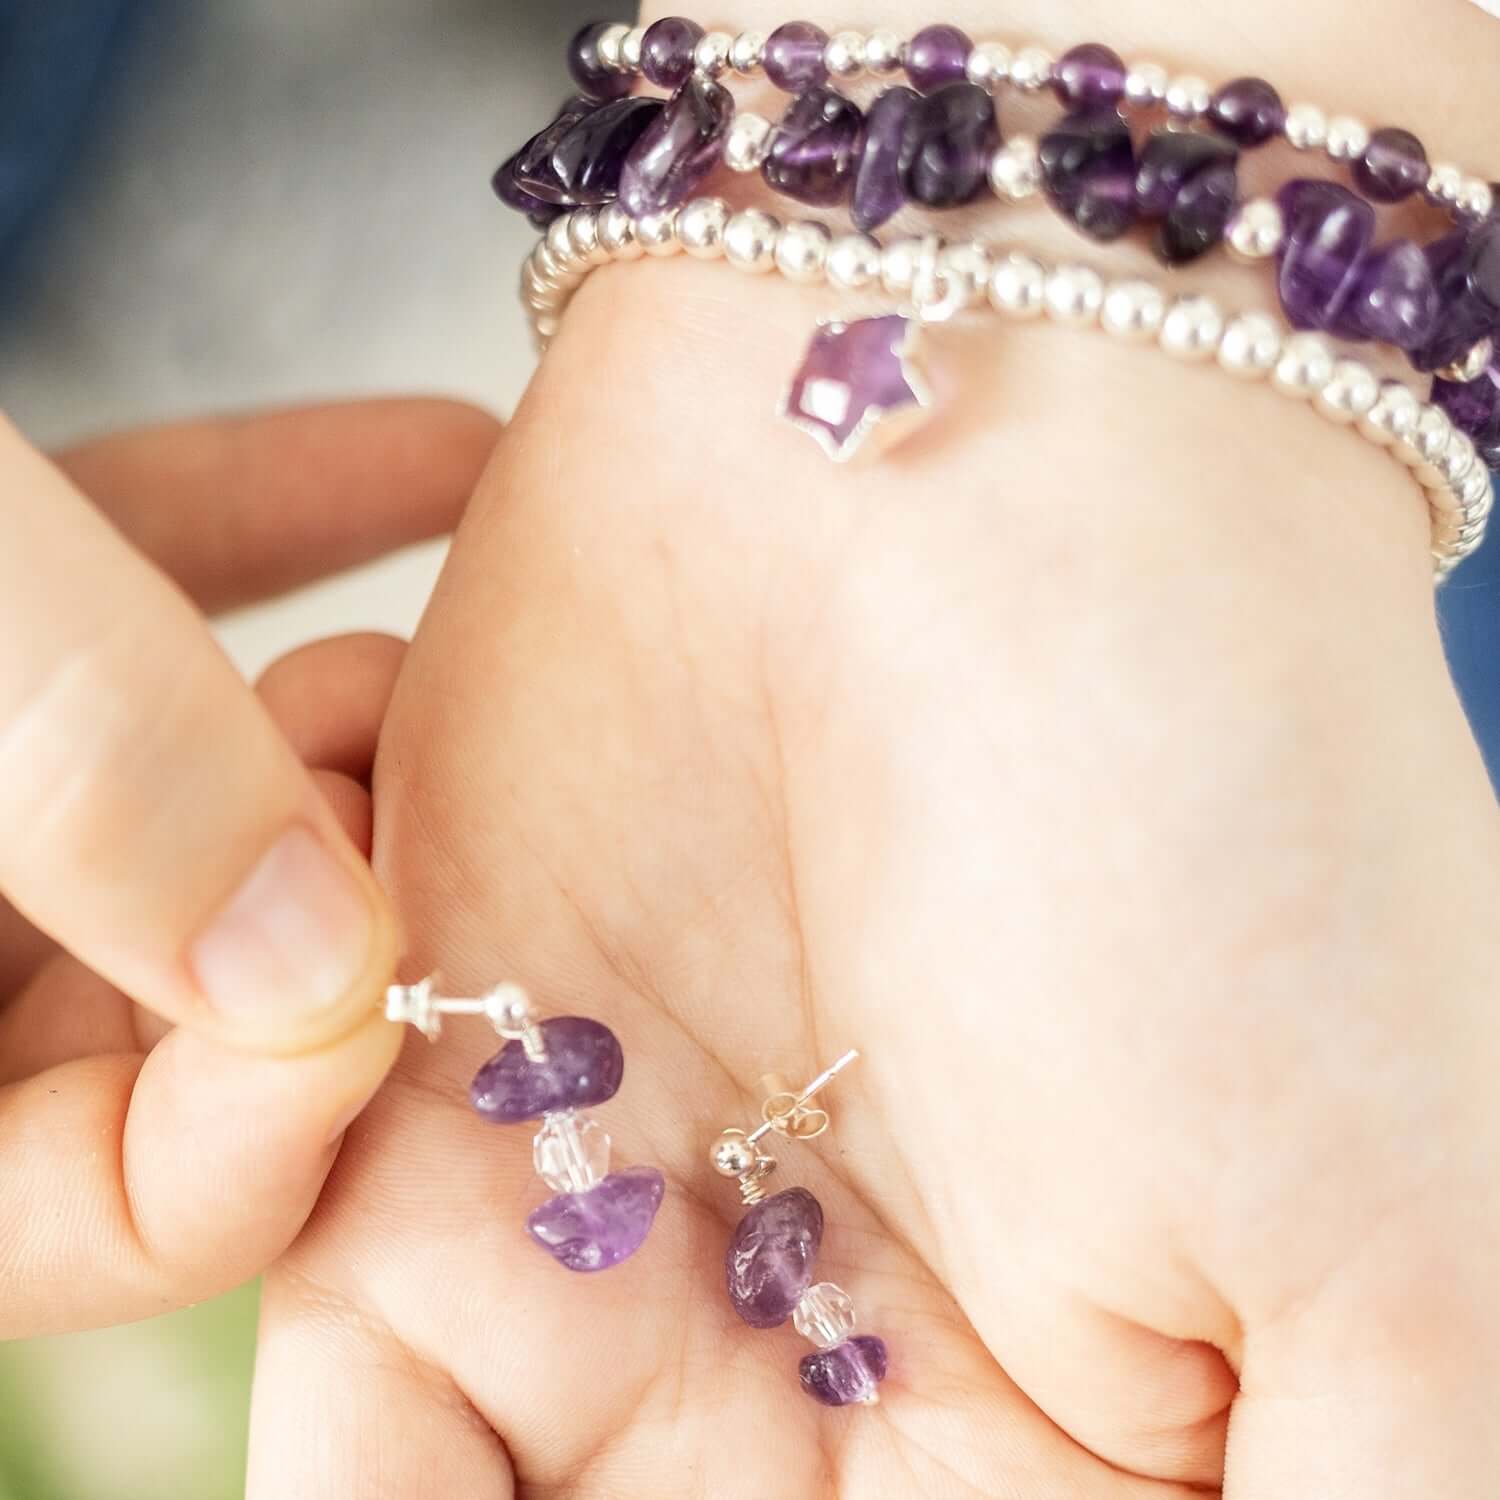 Close-up of a person holding a pair of gemstone drop earrings made with purple beads. The hand is wearing matching bracelets with similar purple stones and silver beads. The background is blurred, focusing attention on the jewelry.